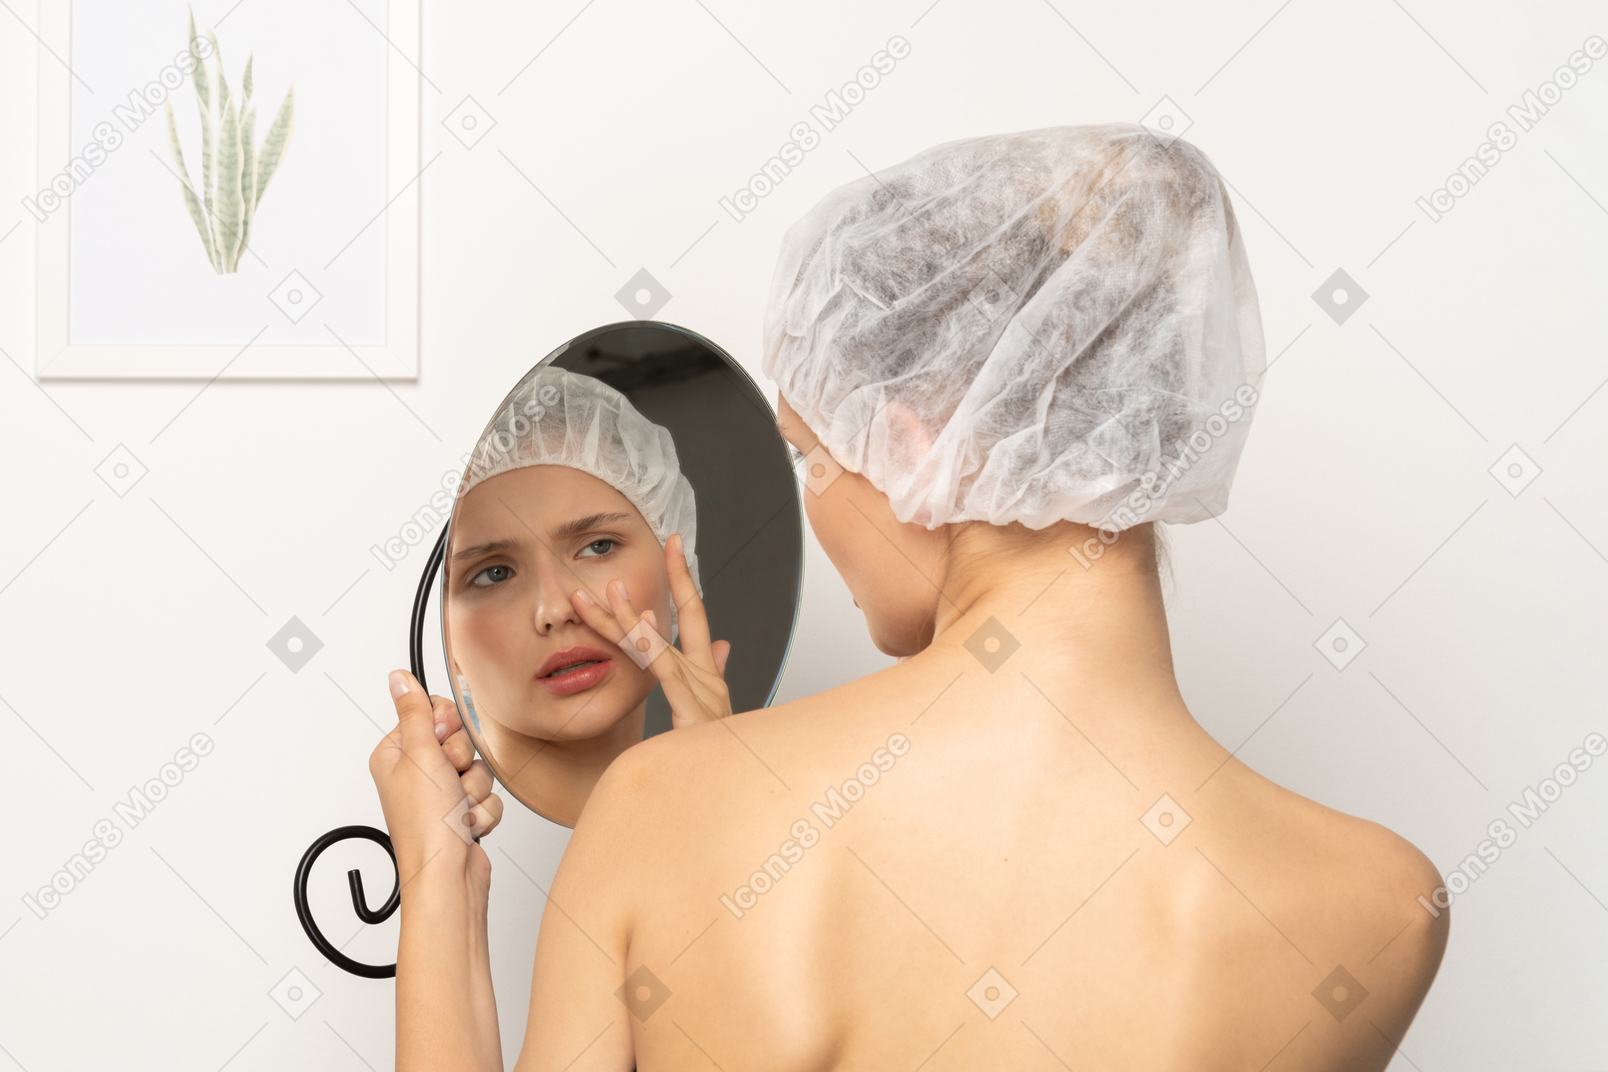 Disappointed woman looking at her reflection in the mirror